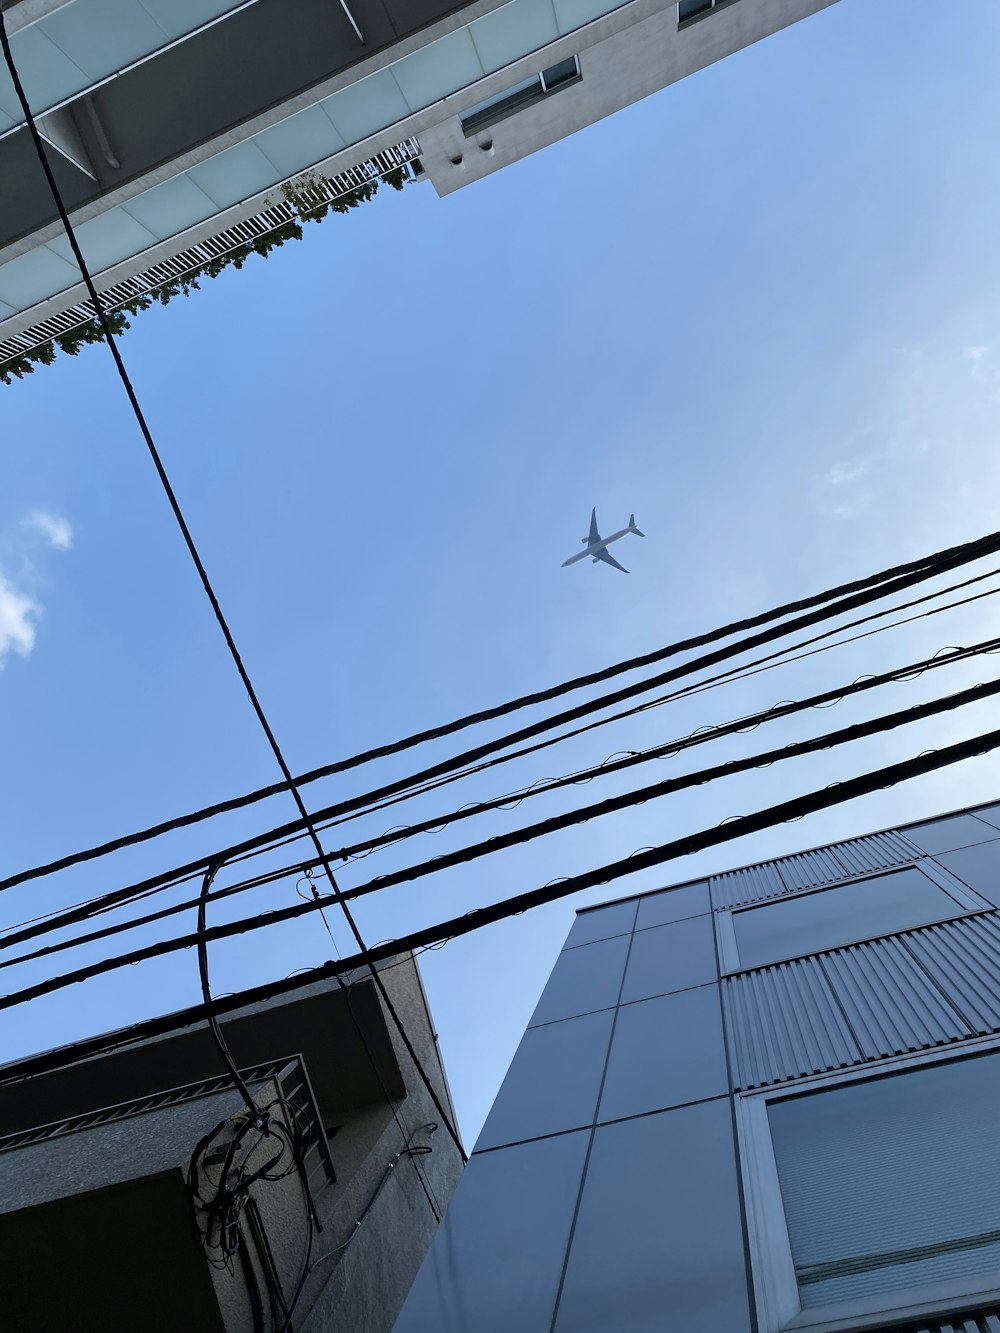 an airplane flying over a building and power lines